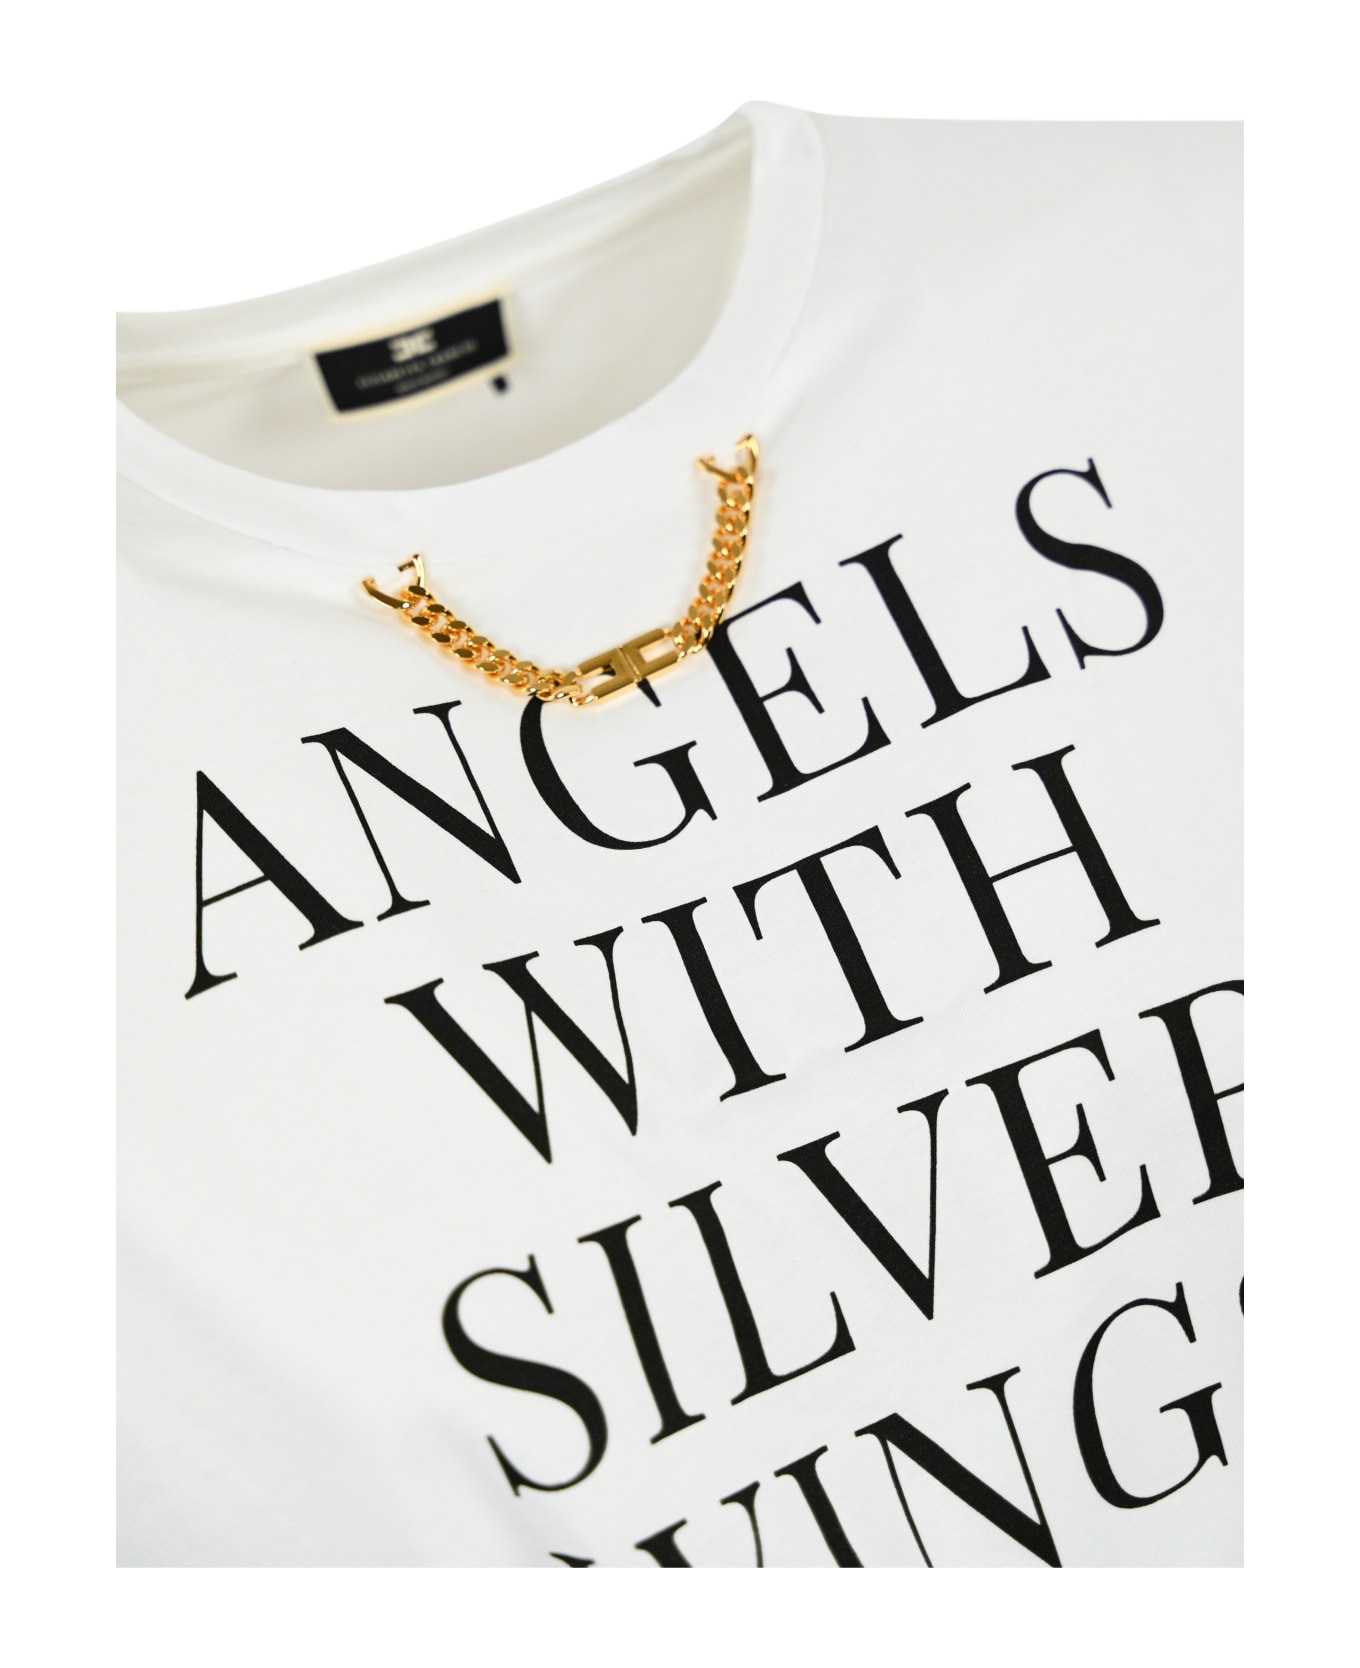 Elisabetta Franchi Cropped T-shirt With Knot - Gesso